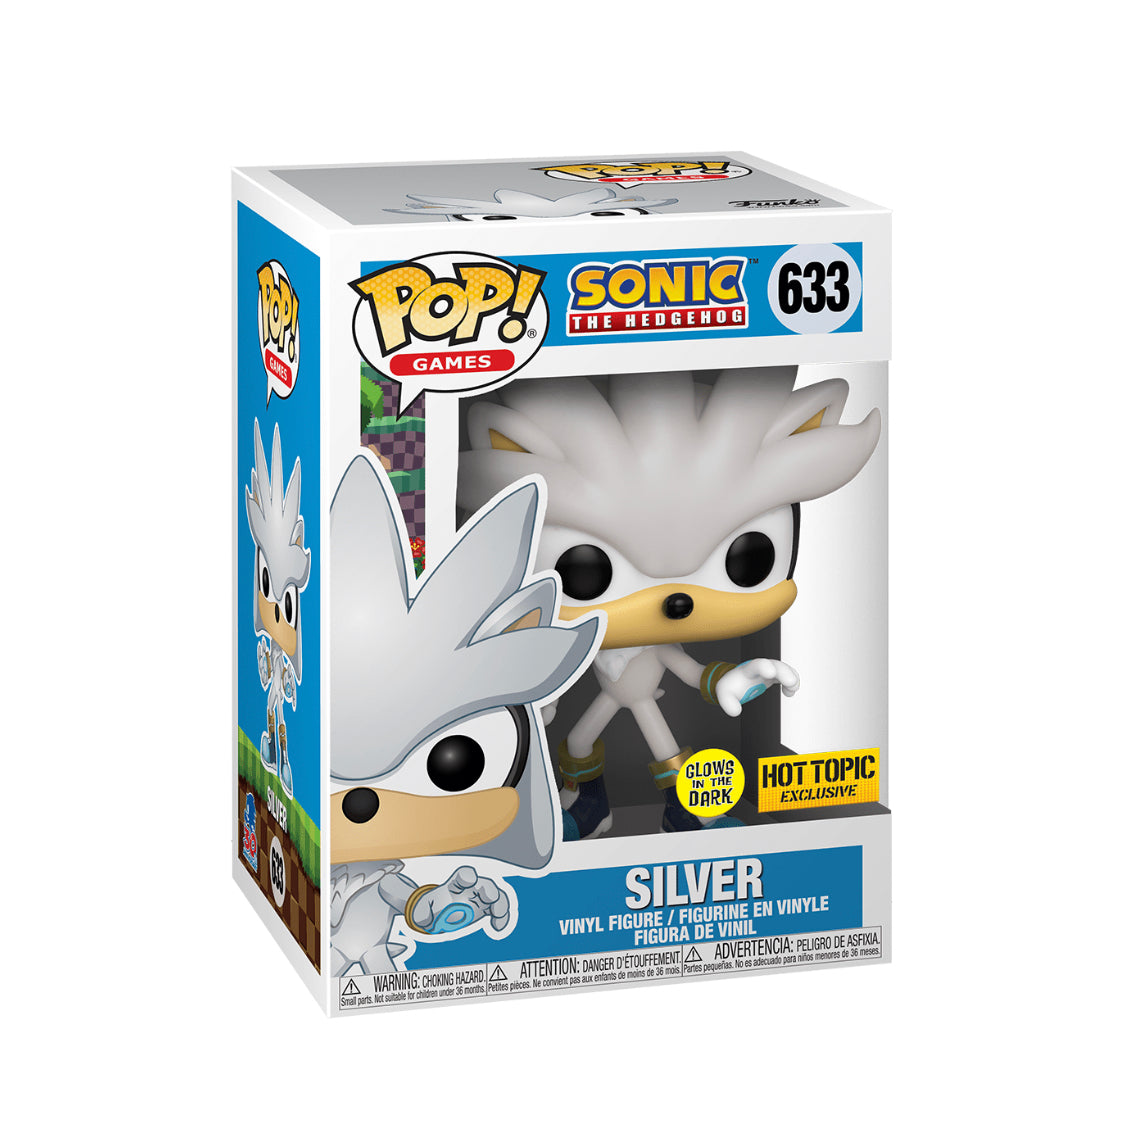 Pop! Games - Sonic The Hedgehog - Silver - #633 - Glow In The Dark & Hot Topic EXCLUSIVE